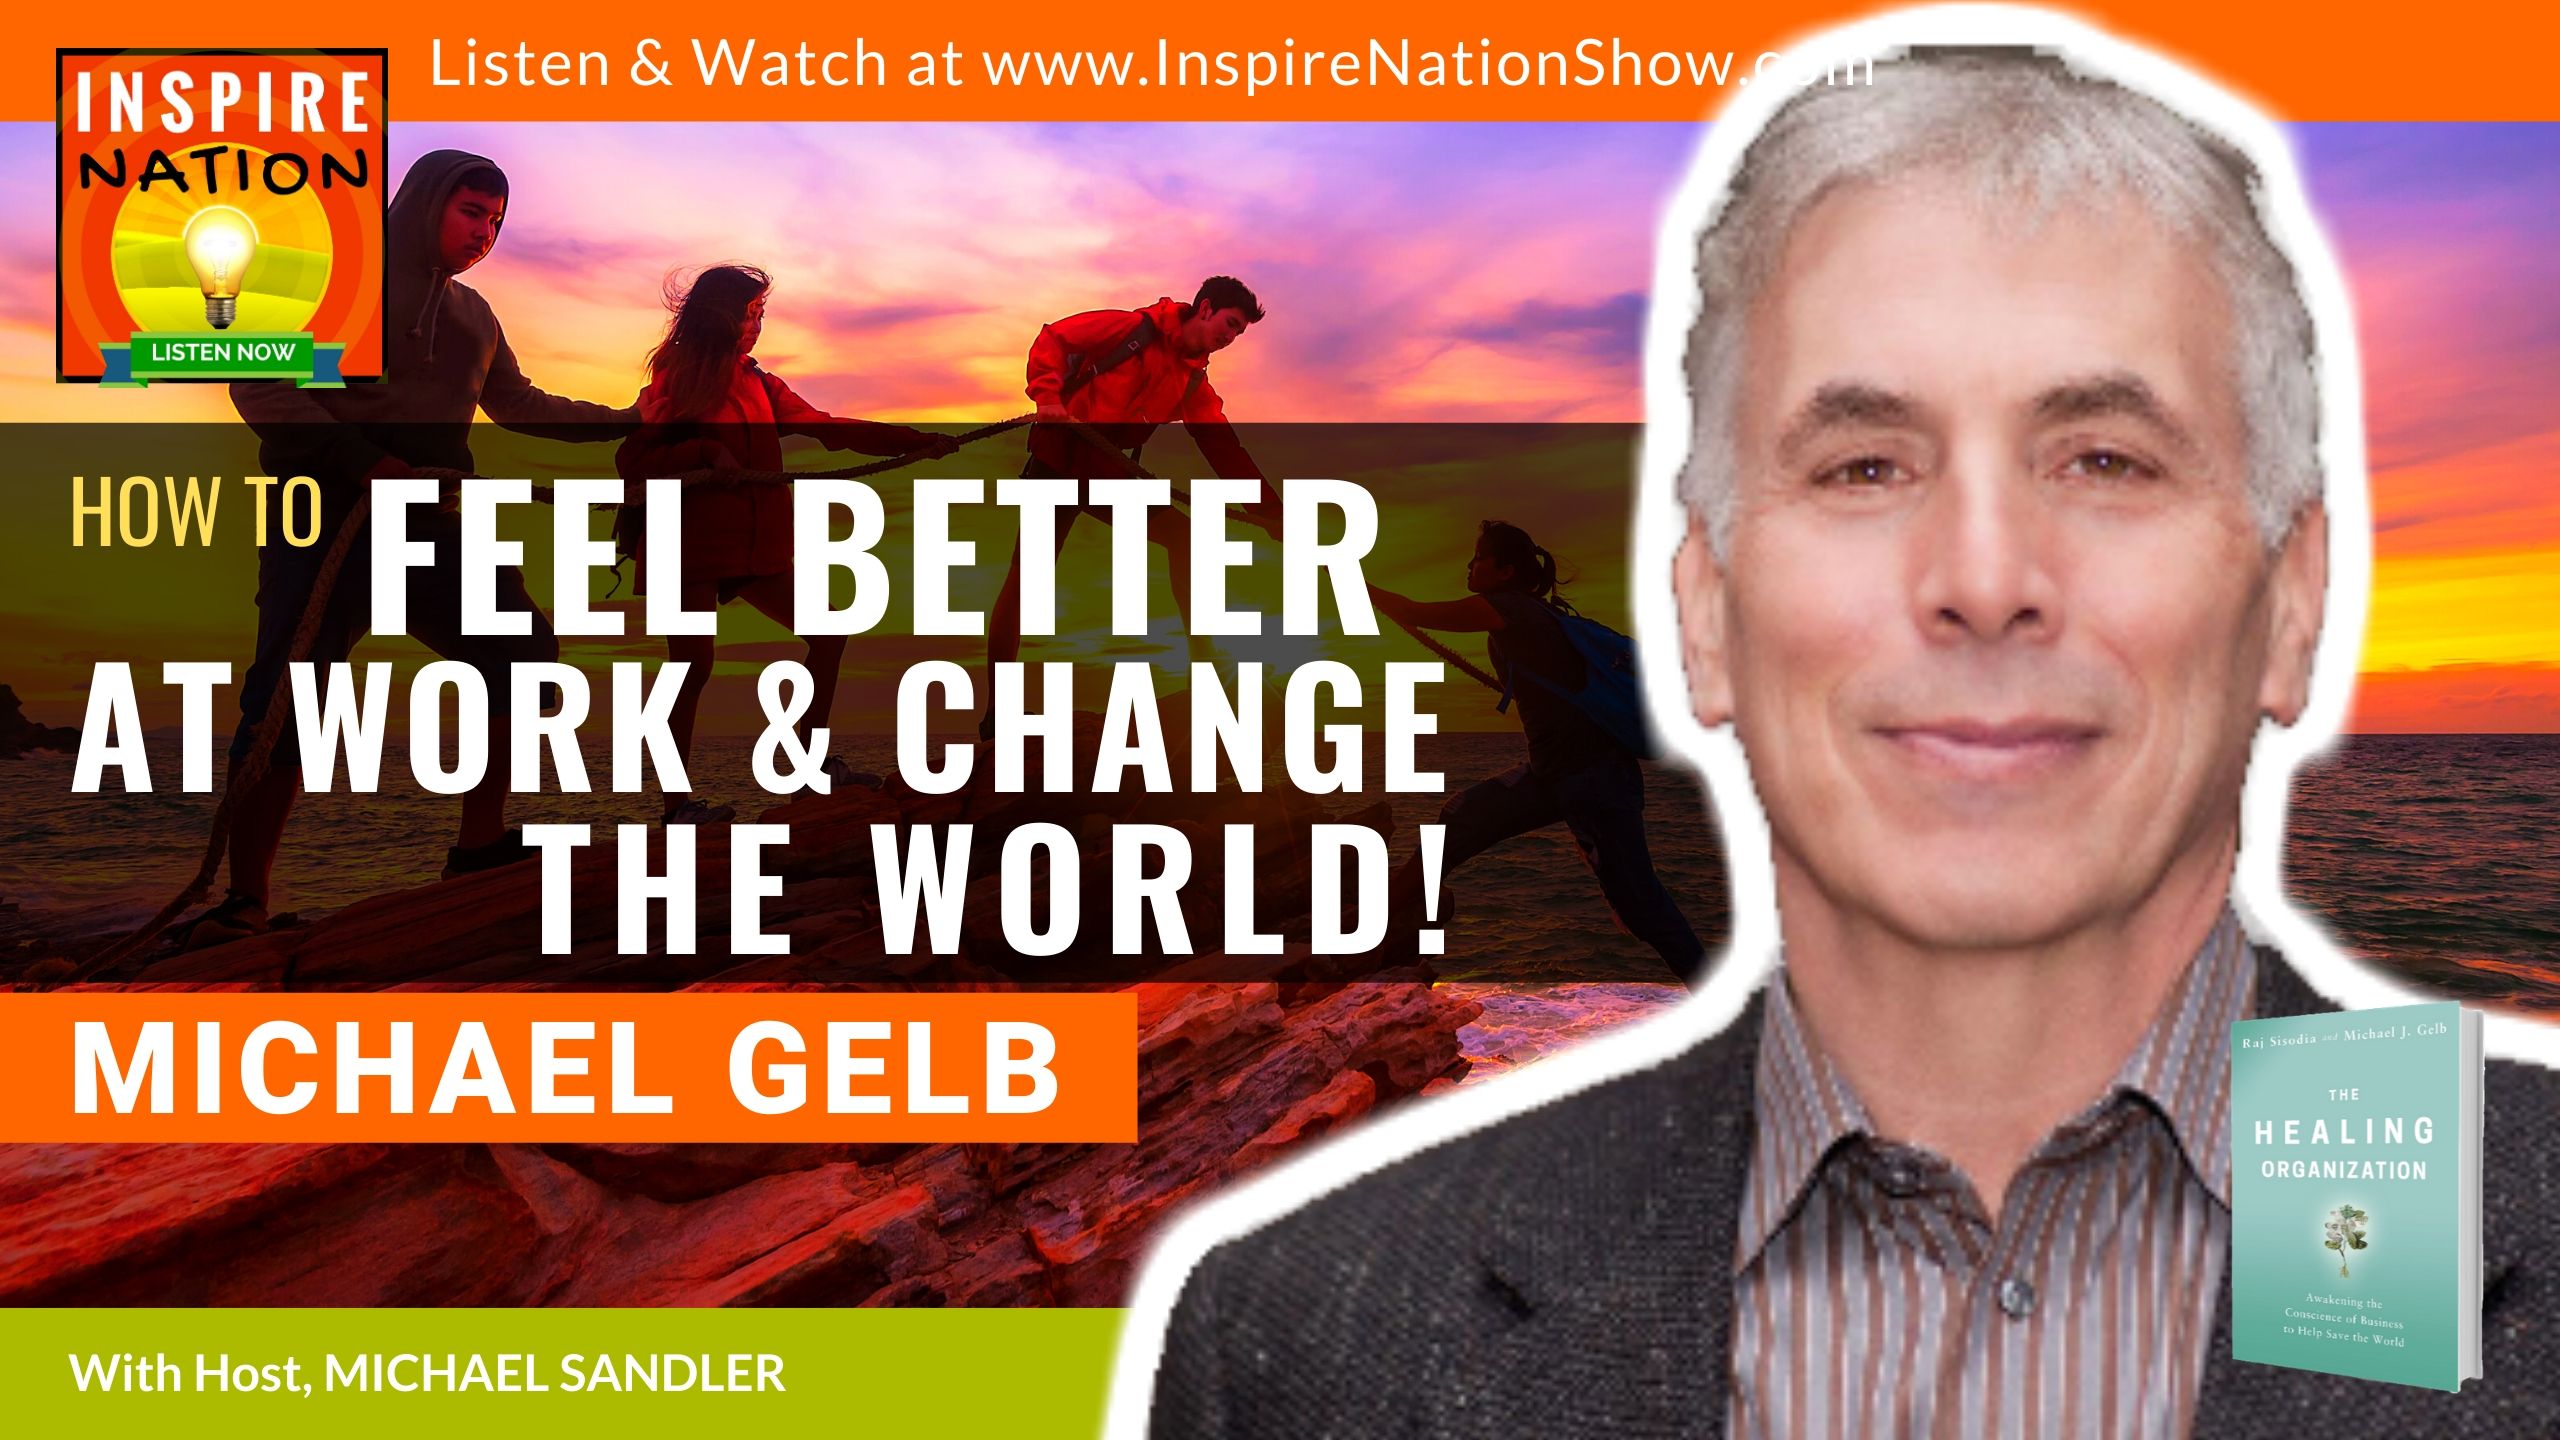 Michael Sandler interviews Michael Gelb on The Healing Organization and how to feel better at work & make a positive impact on the world!